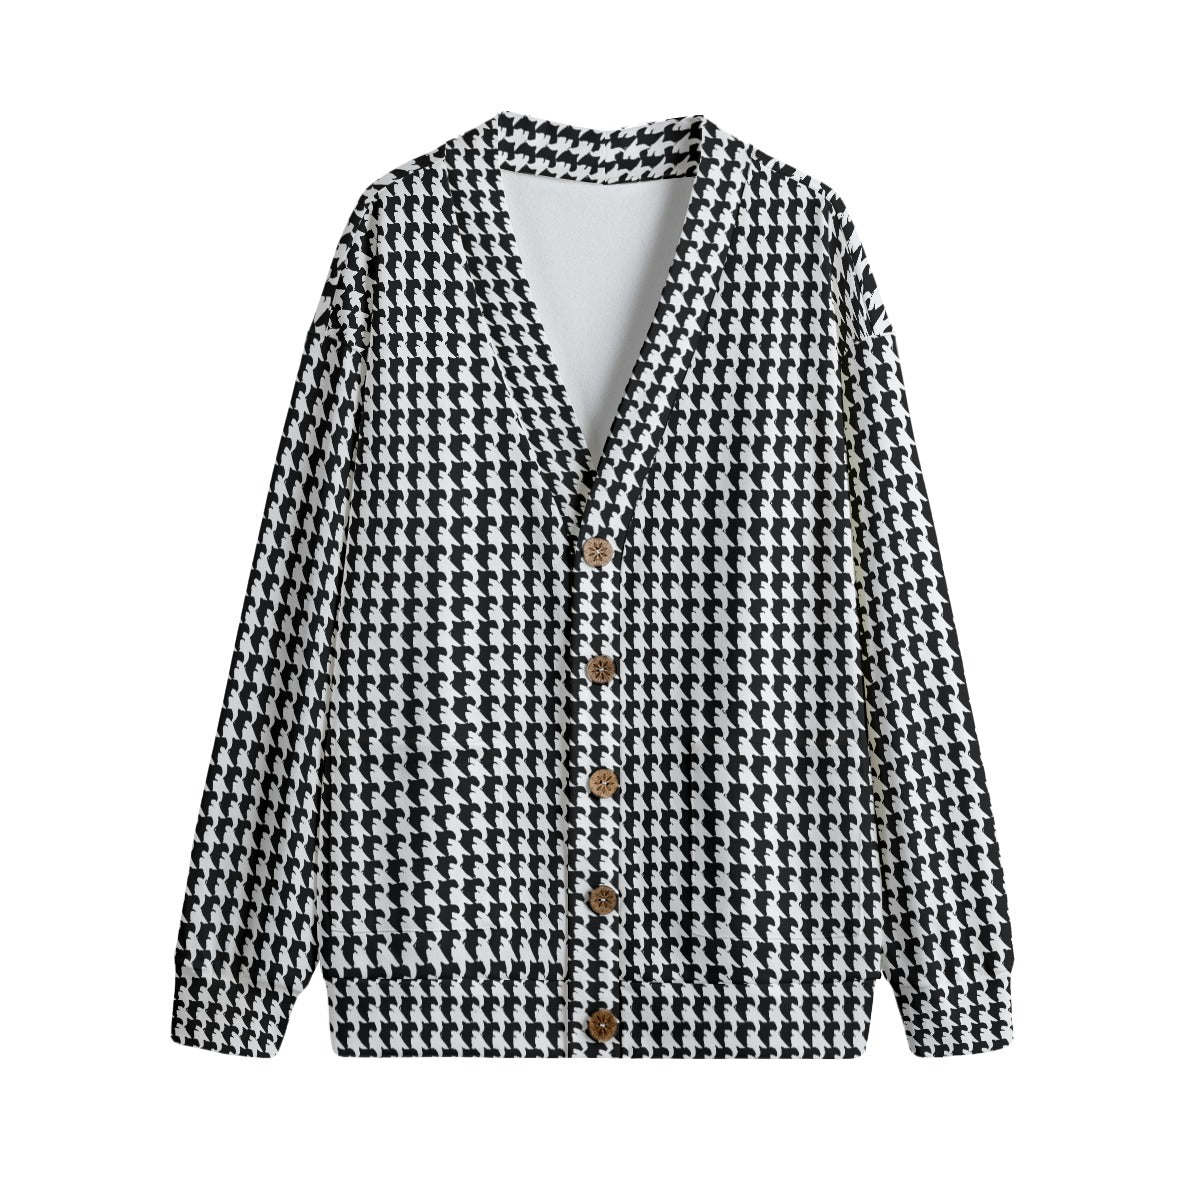 Vampire Art Retro Houndstooth in Black & White Unisex V-neck Knitted Fleece Cardigan With Buttons